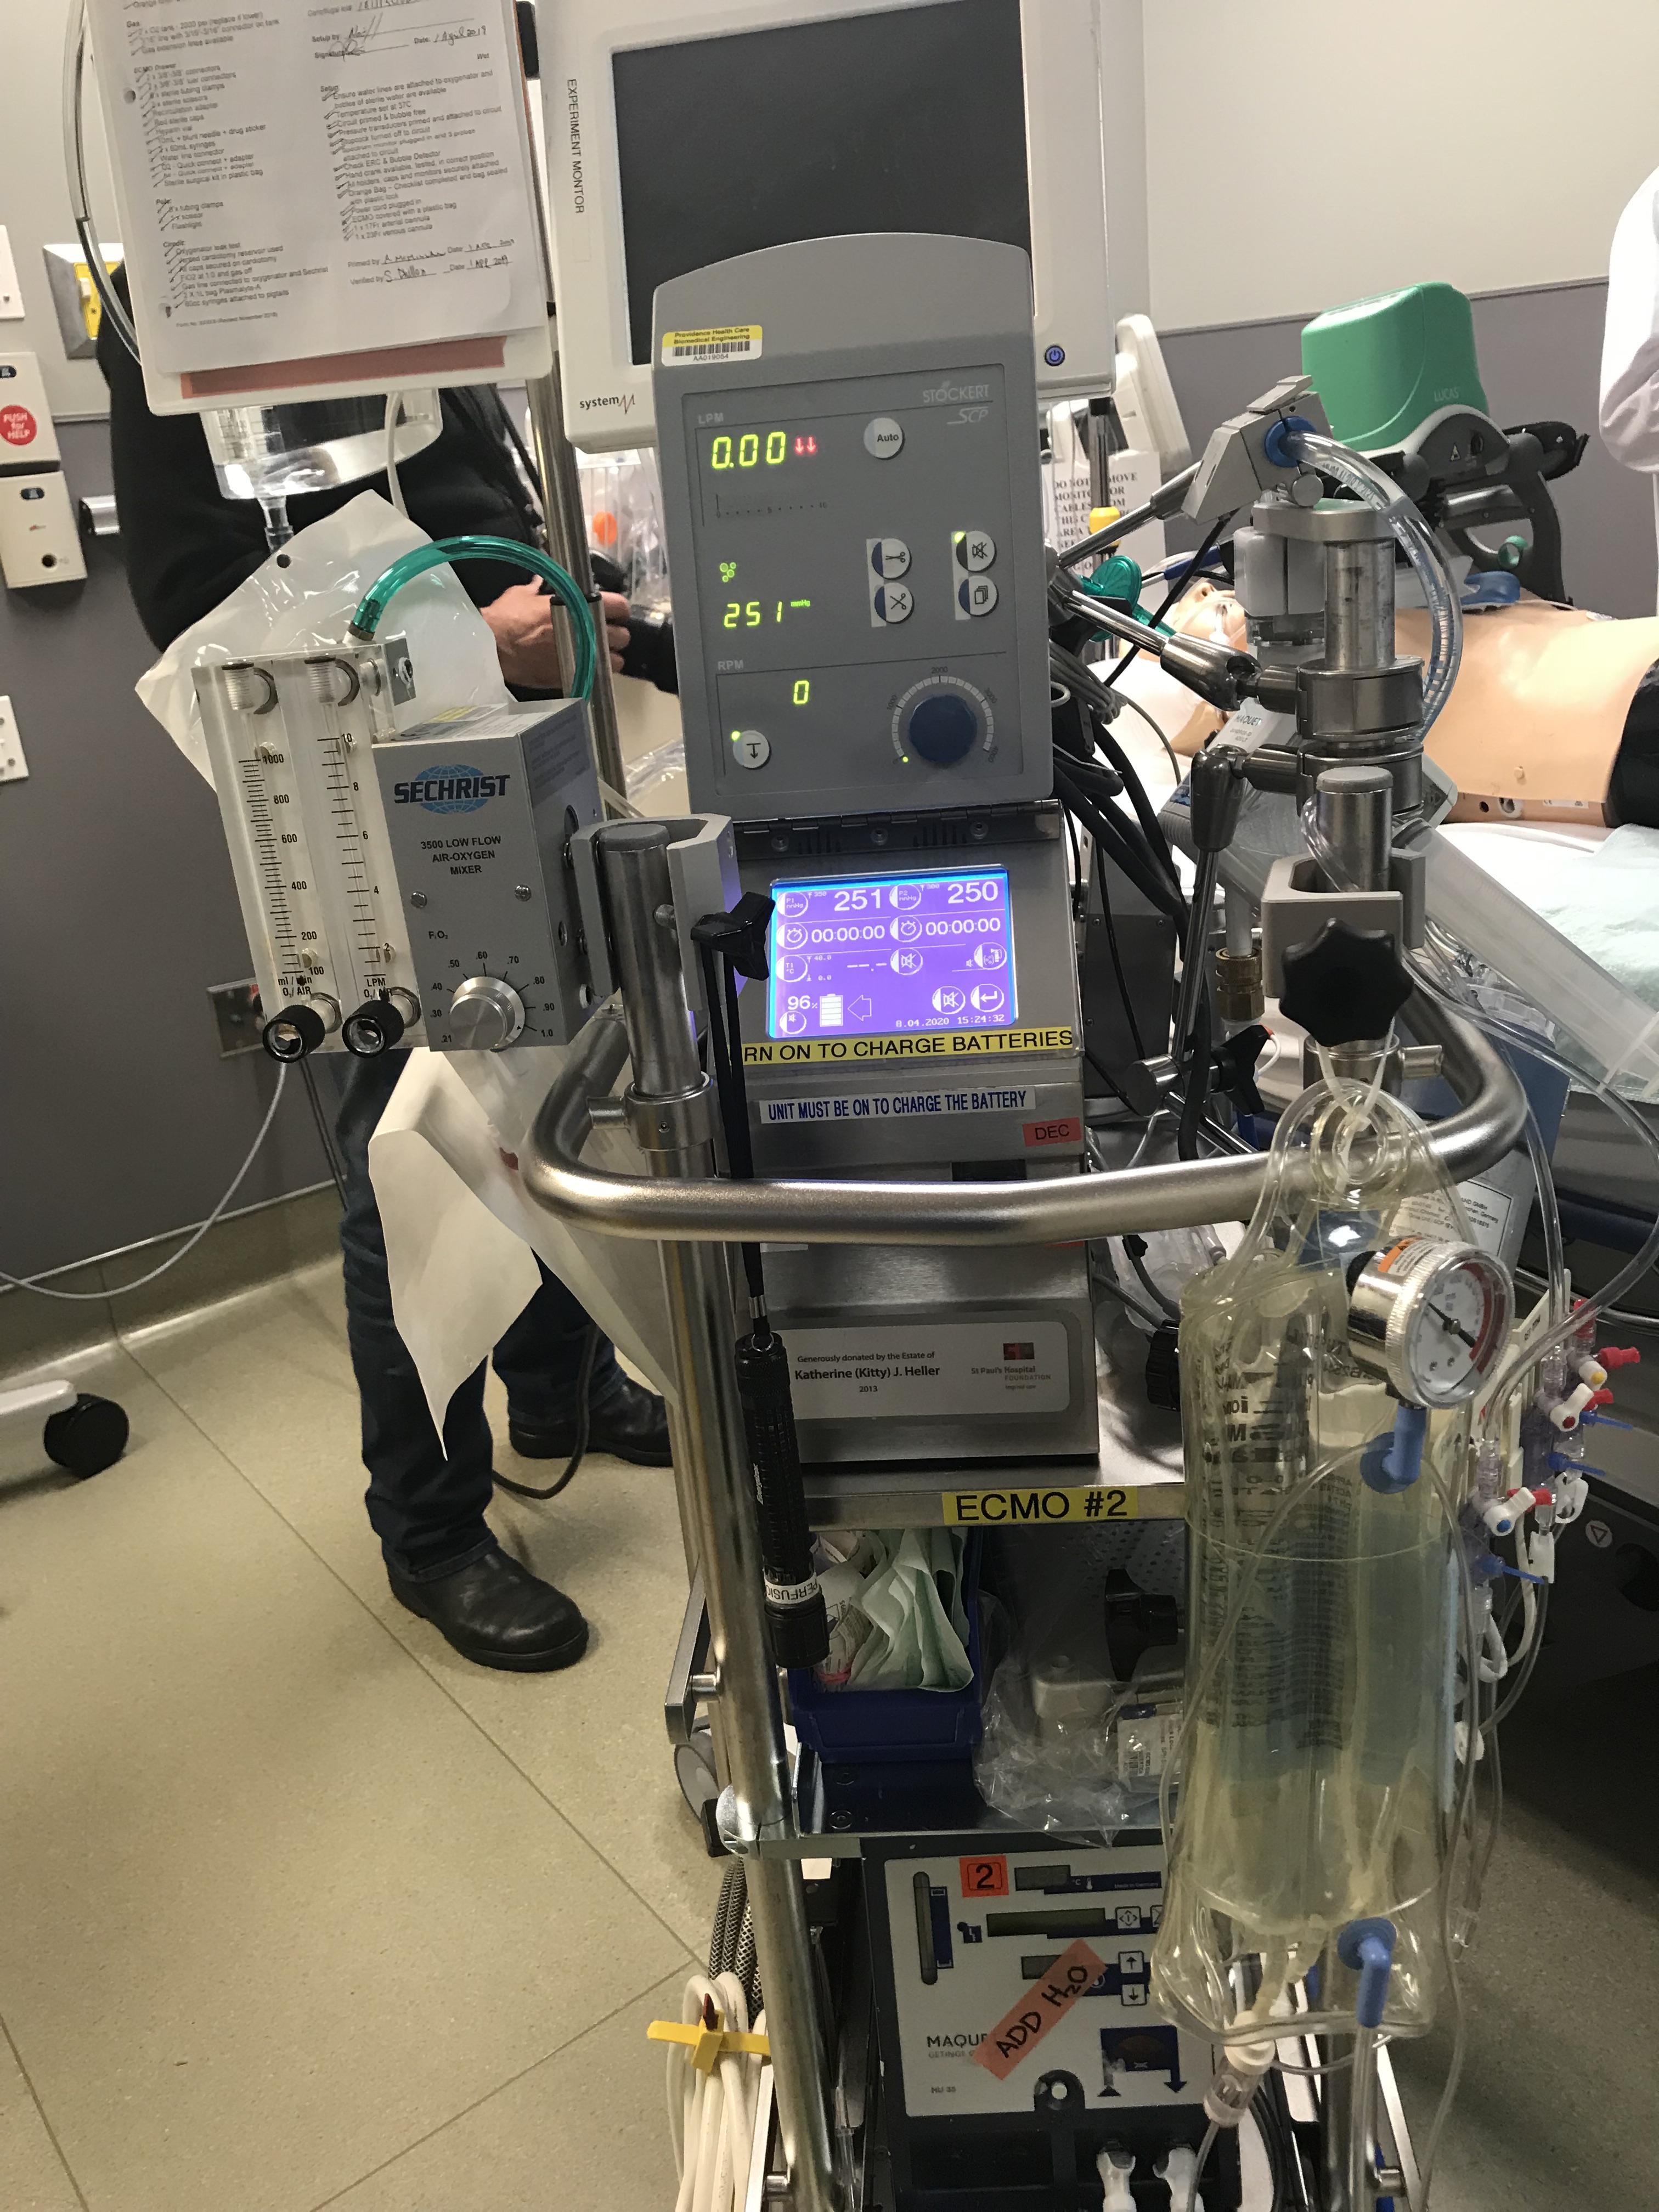 ECMO heart-lung bypass machine and LUCAS are both cardiac equipment used in St. Paul's ER.